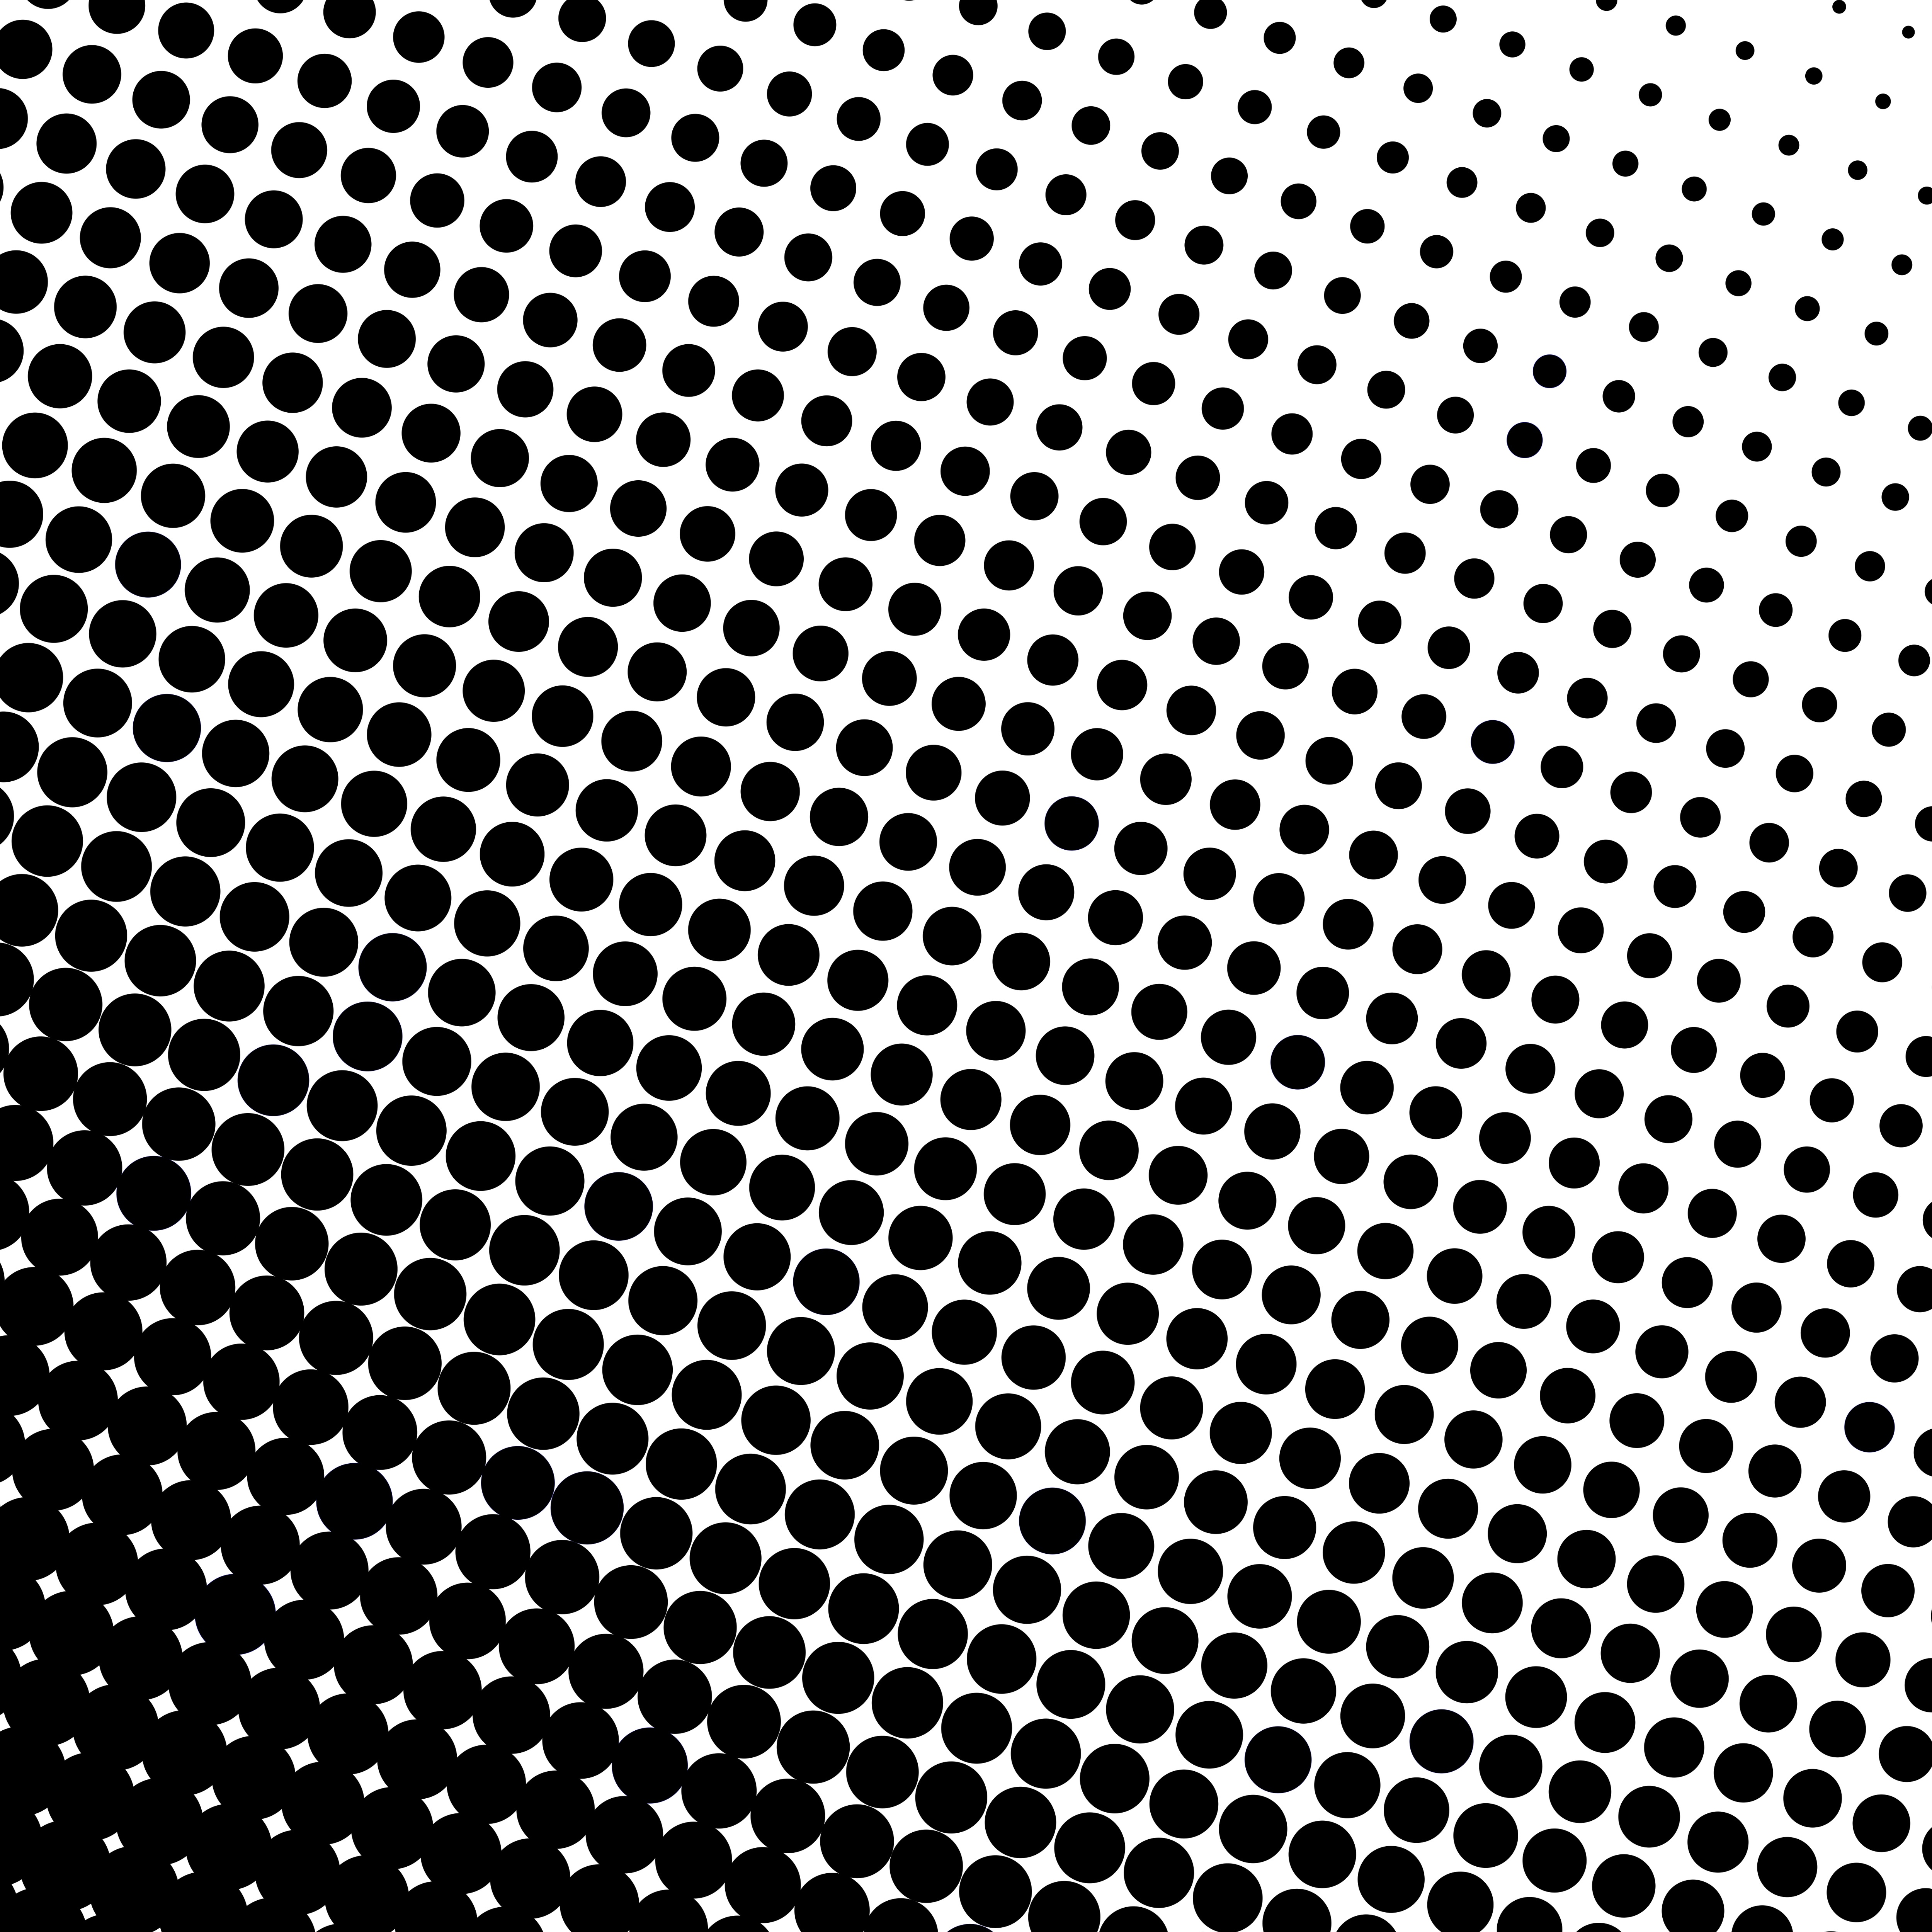 circles, texture, textures, bw, chb, lots of, multitude, magnification, increase High Definition image